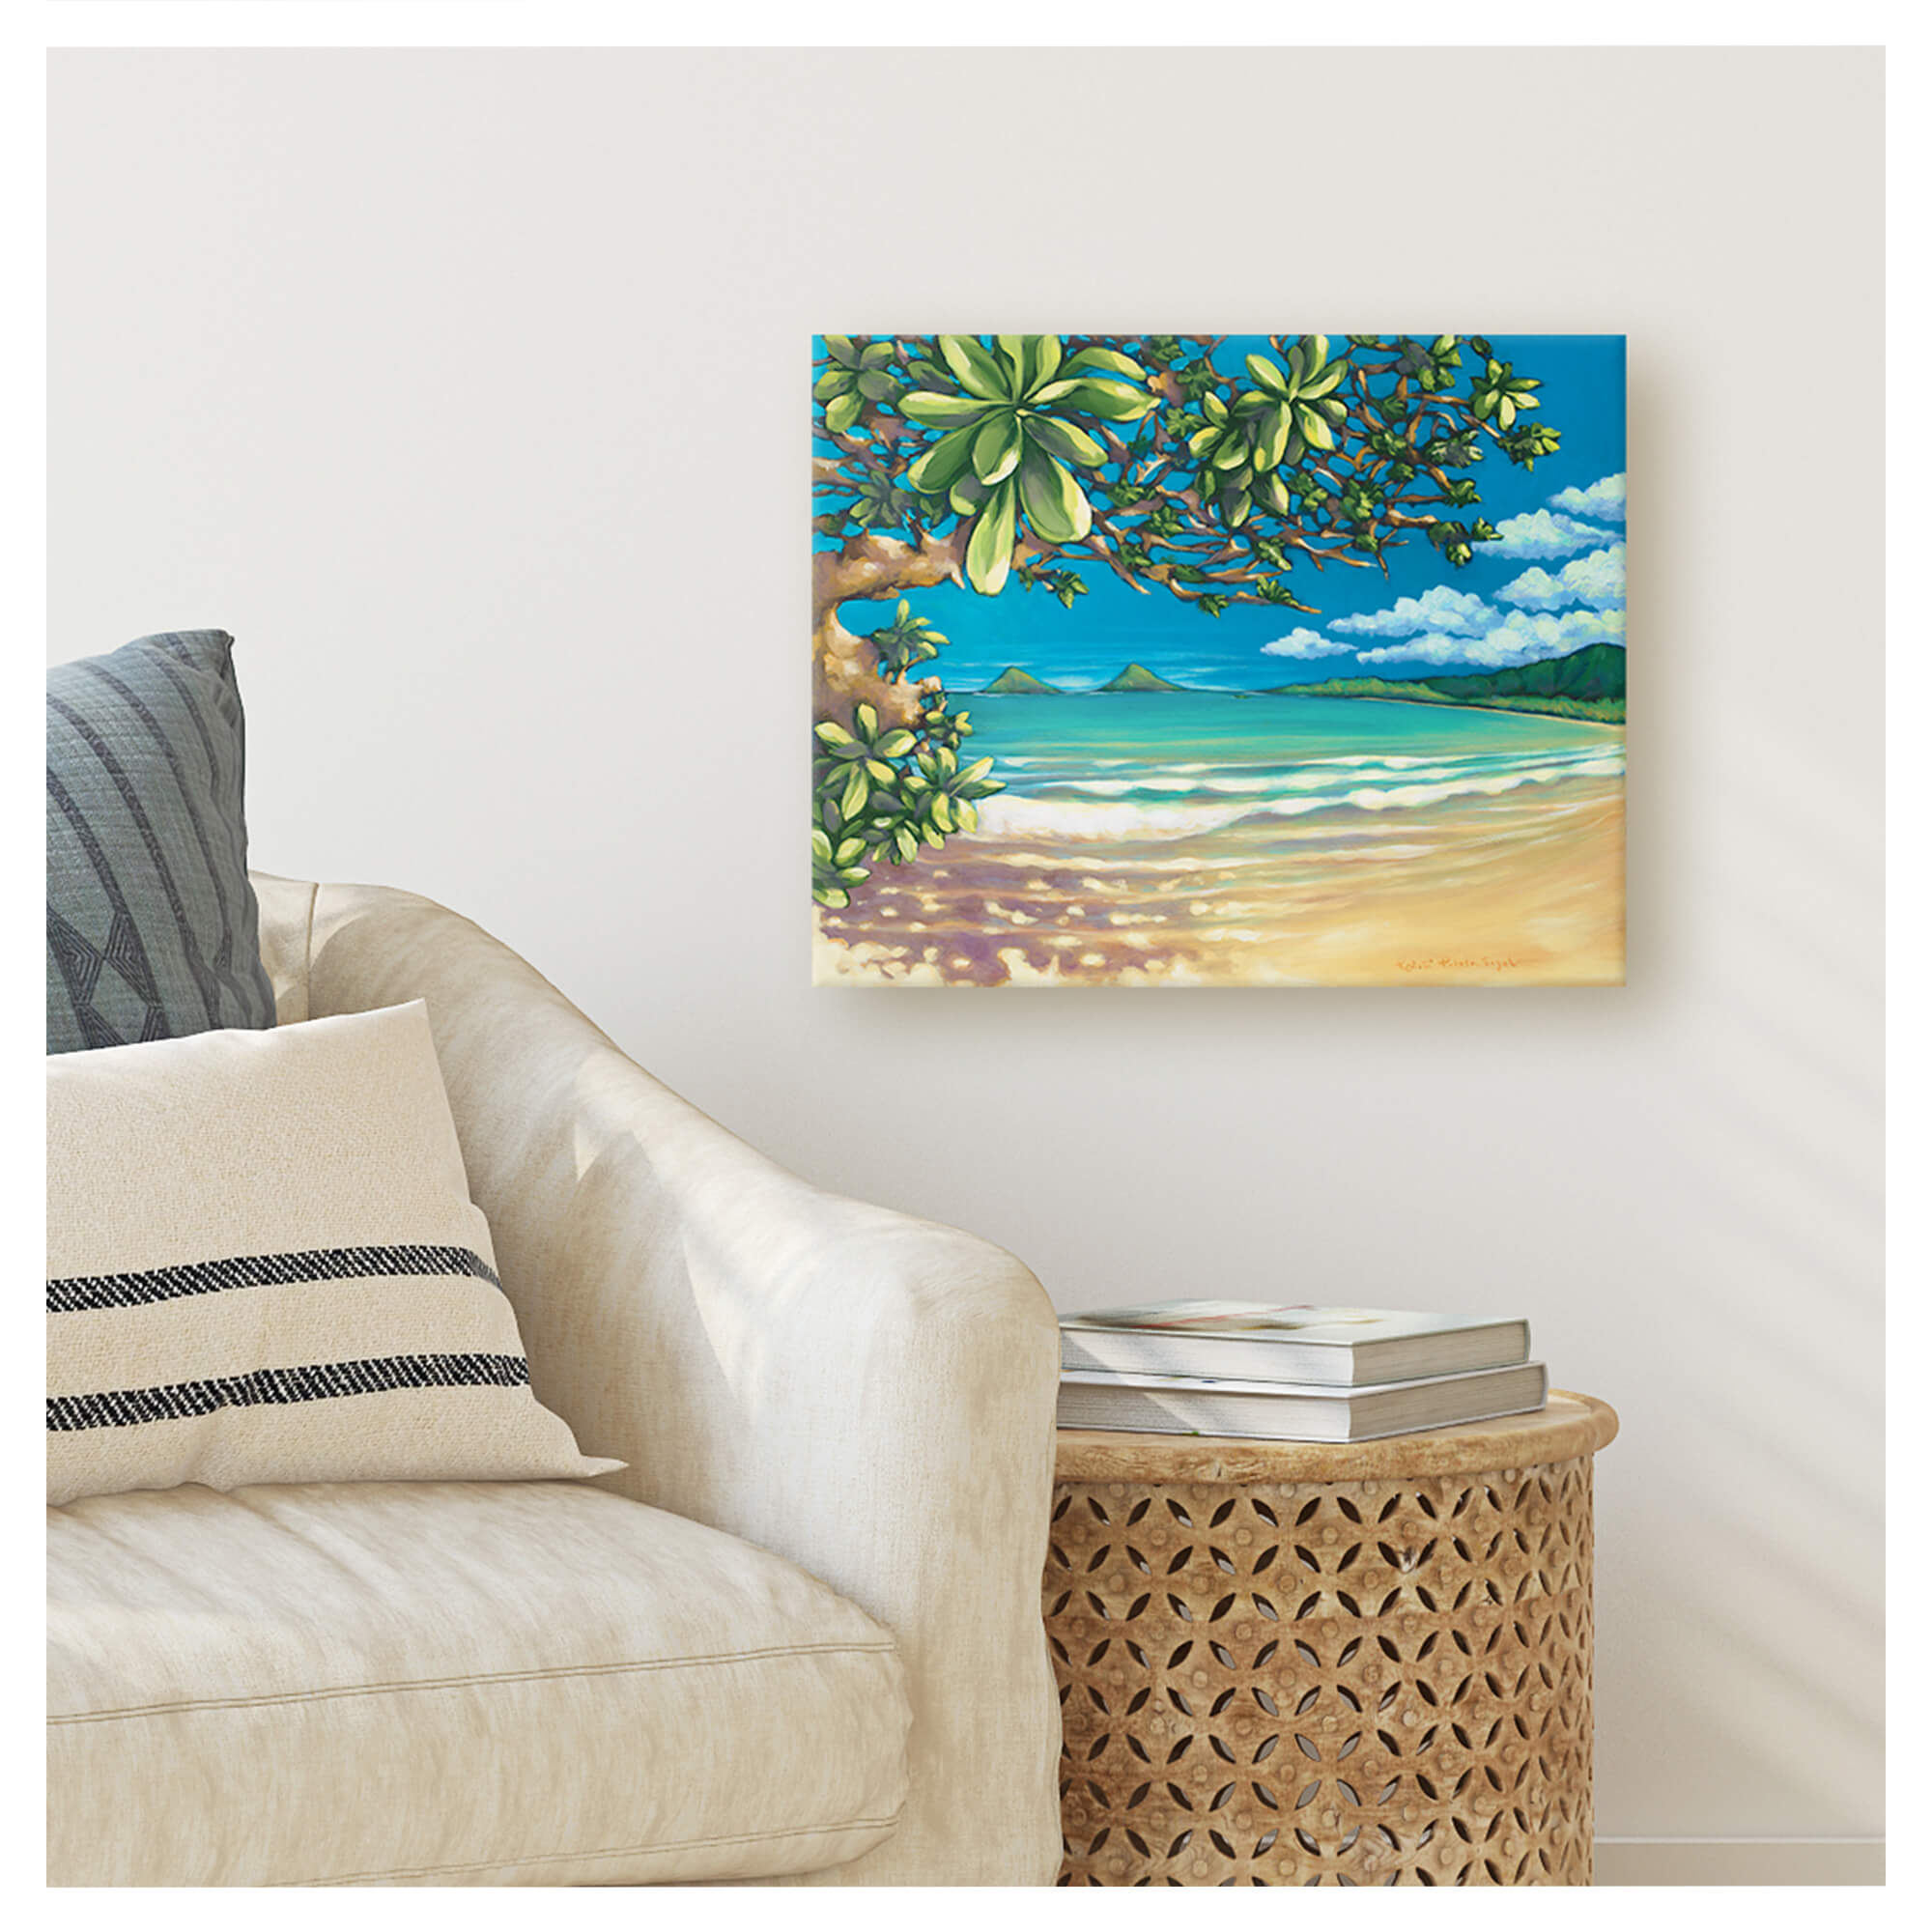 Canvas art print featuring the beach with white sand by hawaii artist Kristi Petosa